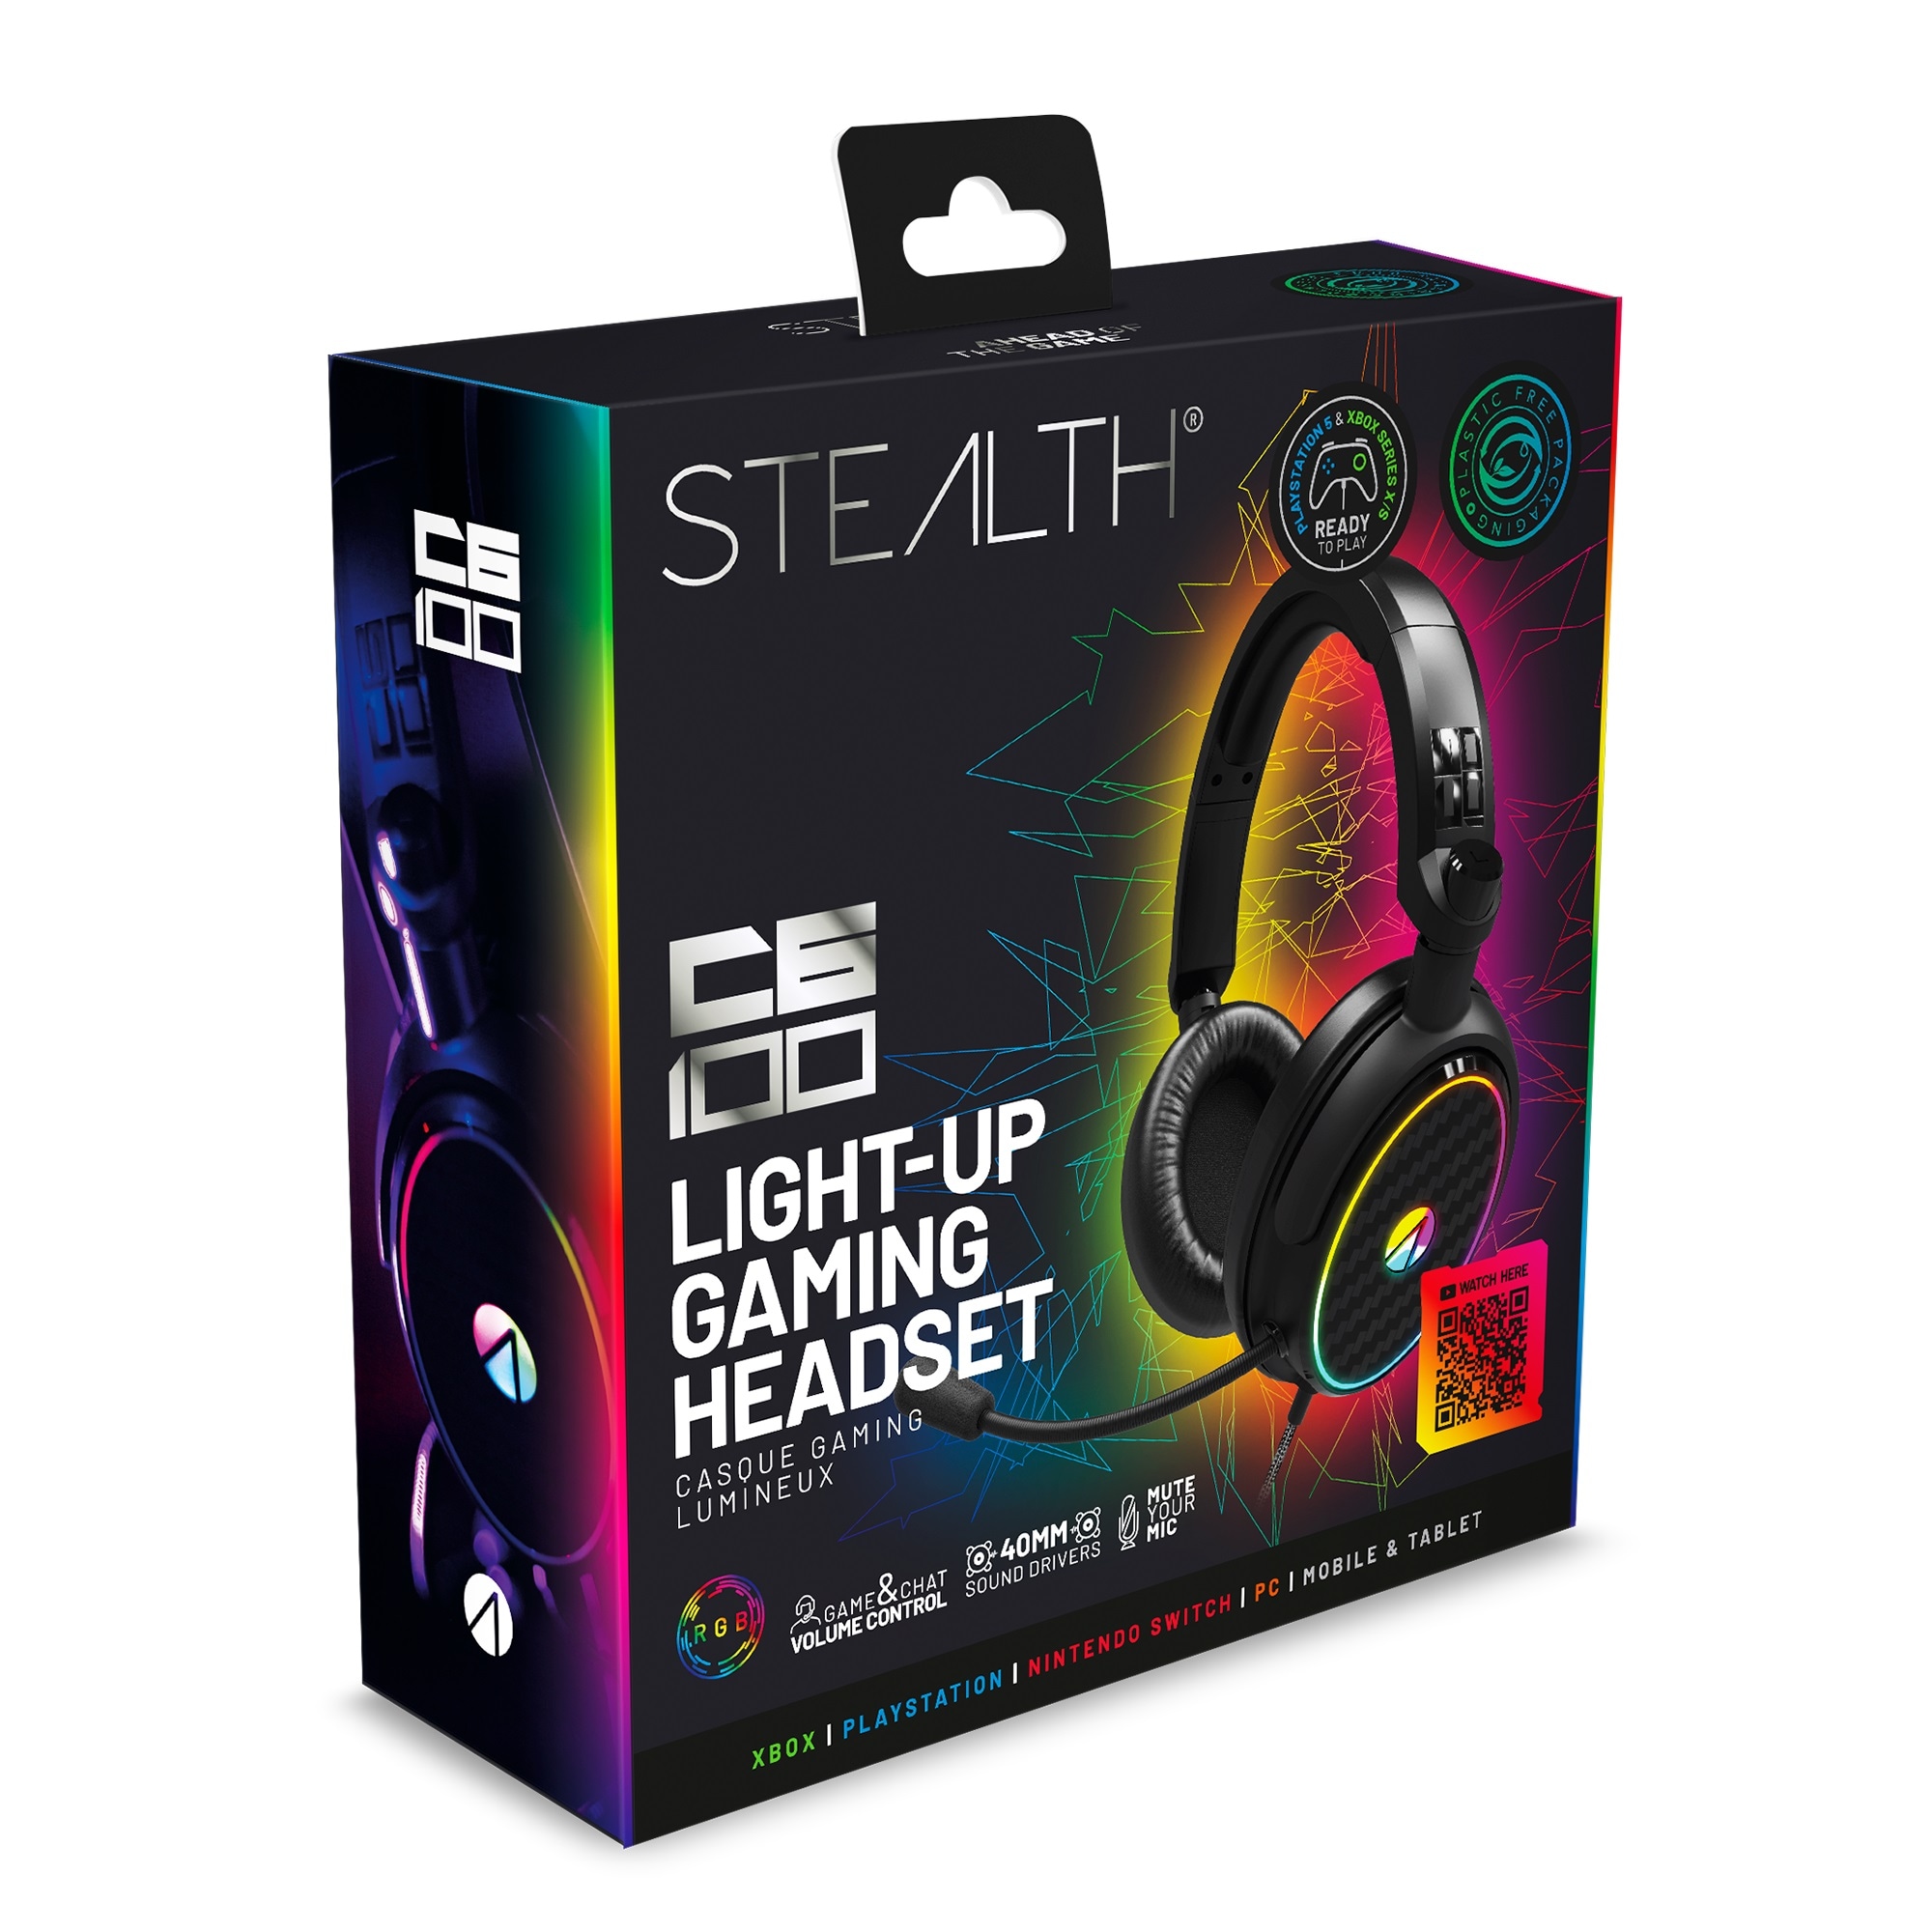 Stealth Gaming-Headset »Stereo Gaming kaufen Verpackung UNIVERSAL online | Headset Beleuchtung«, Plastikfreie LED C6-100 mit